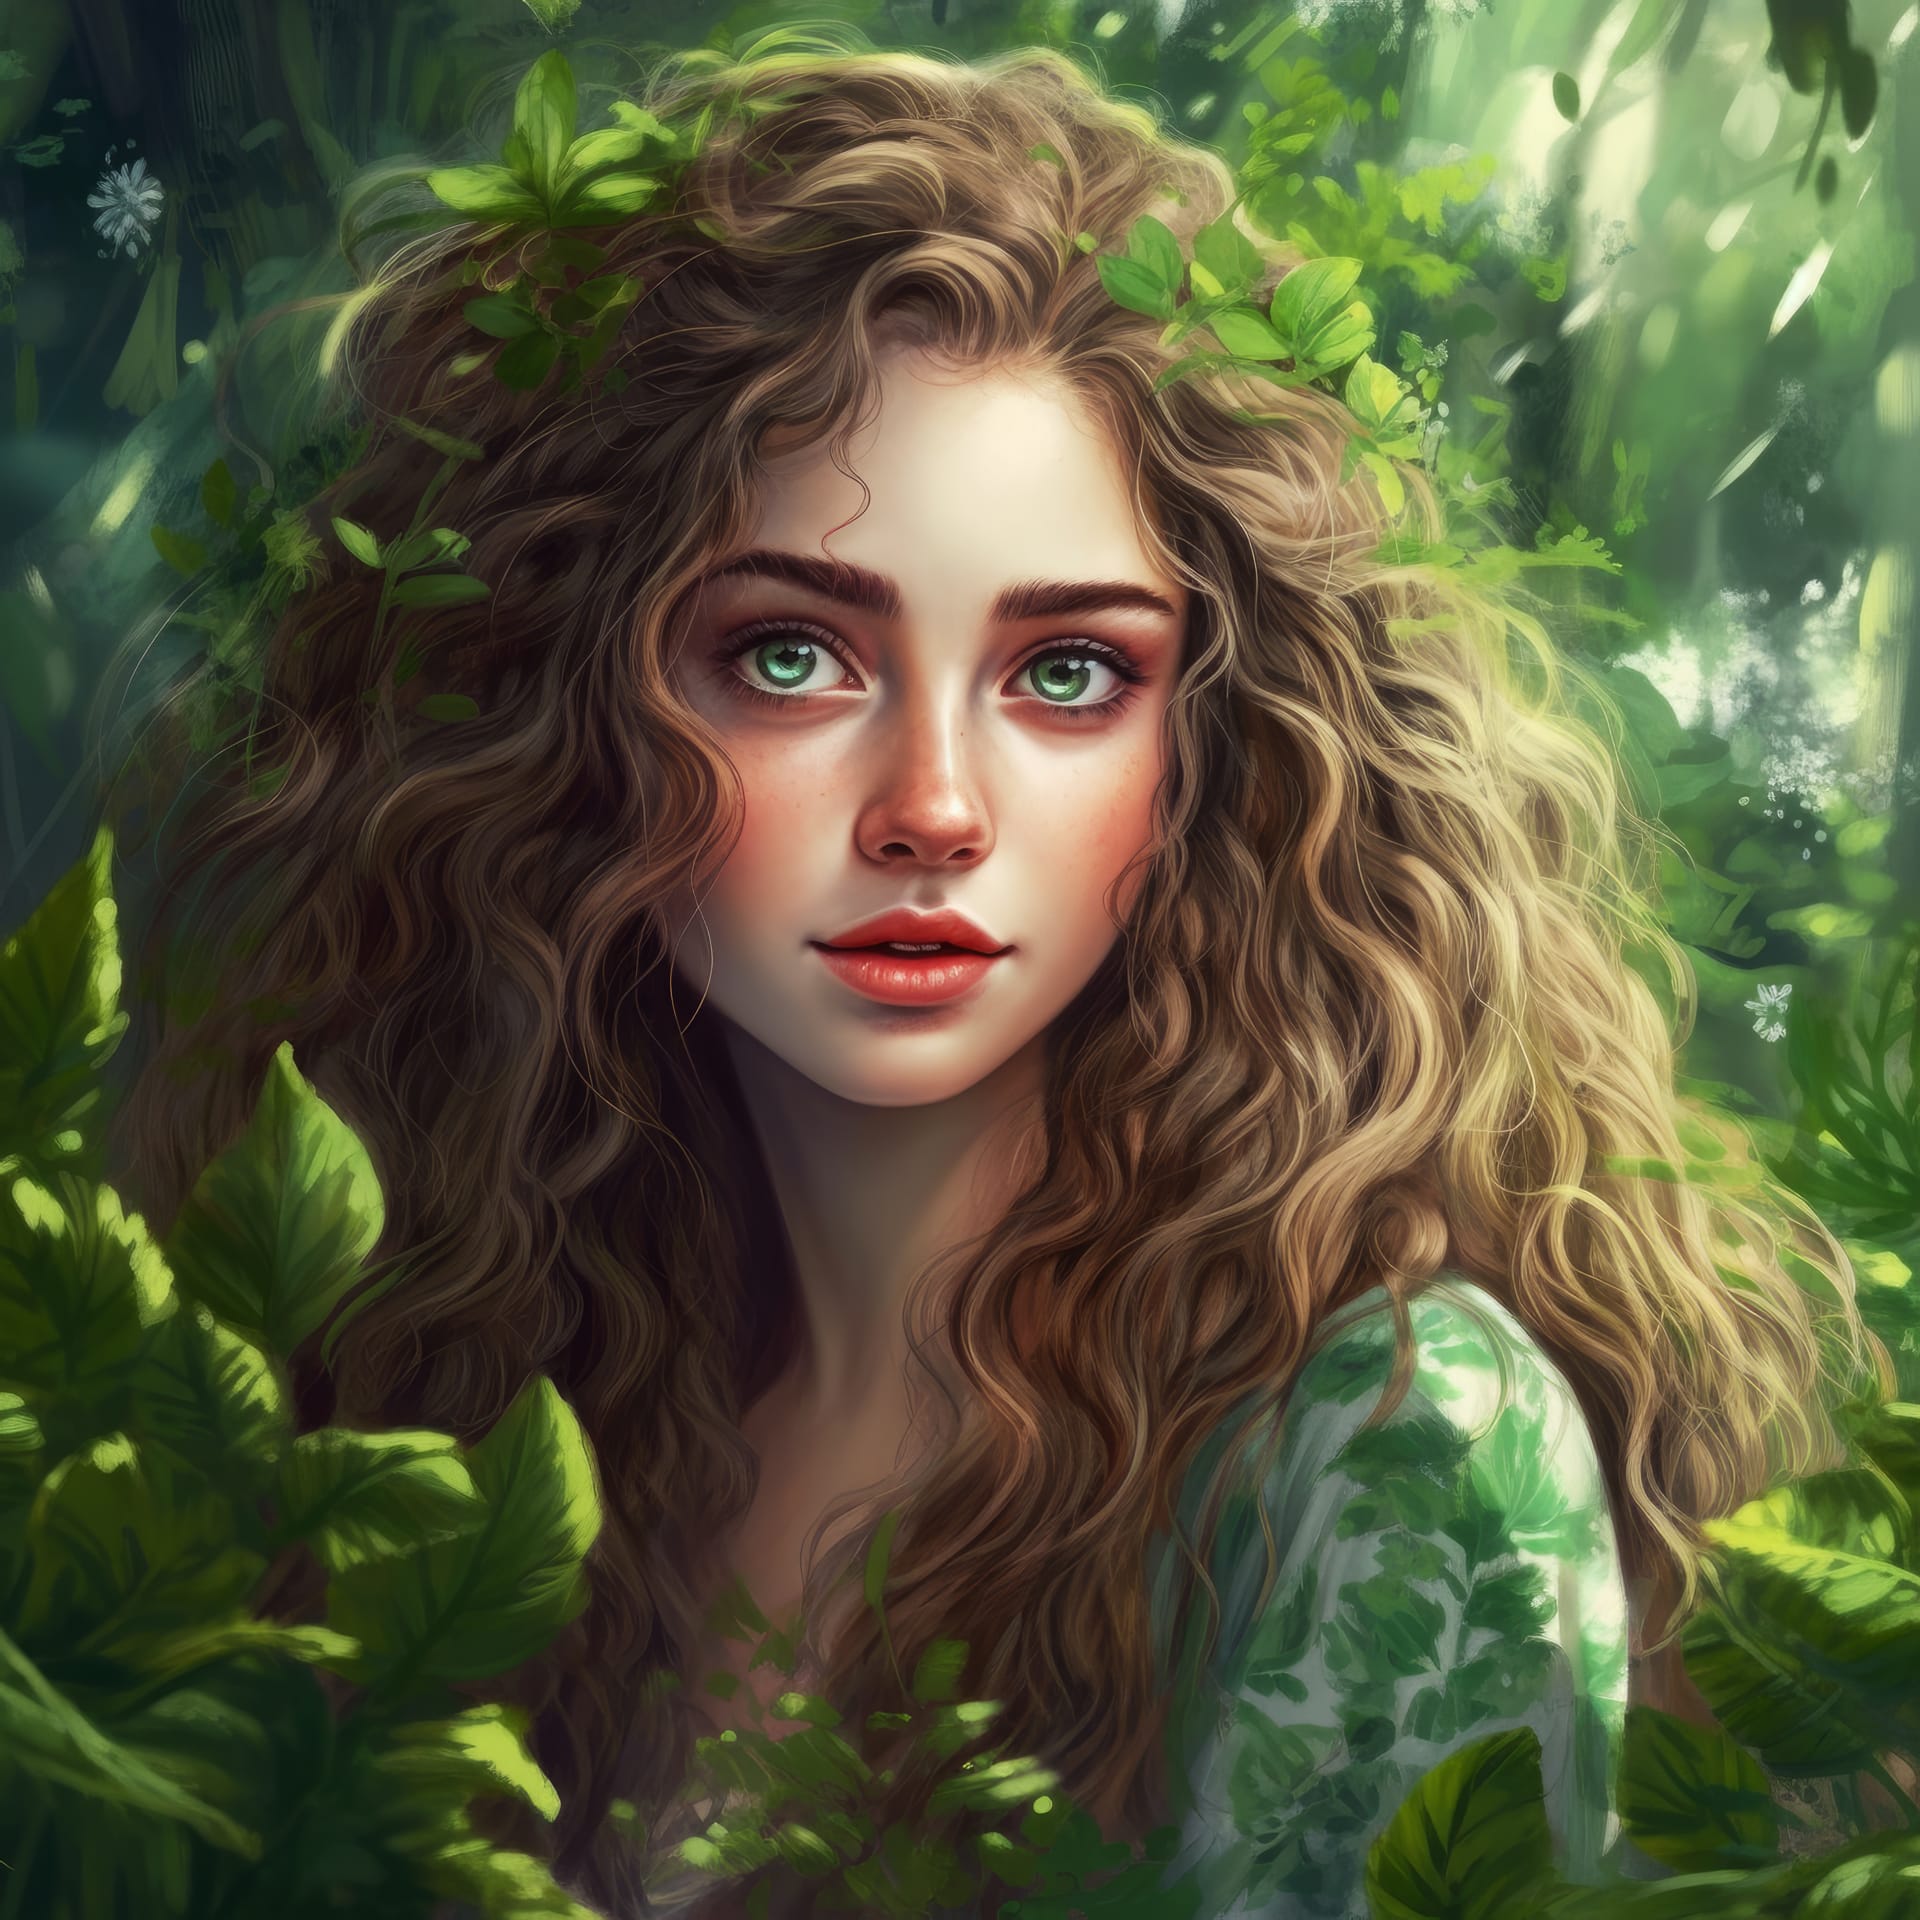 Girl with curly hair green leaves background